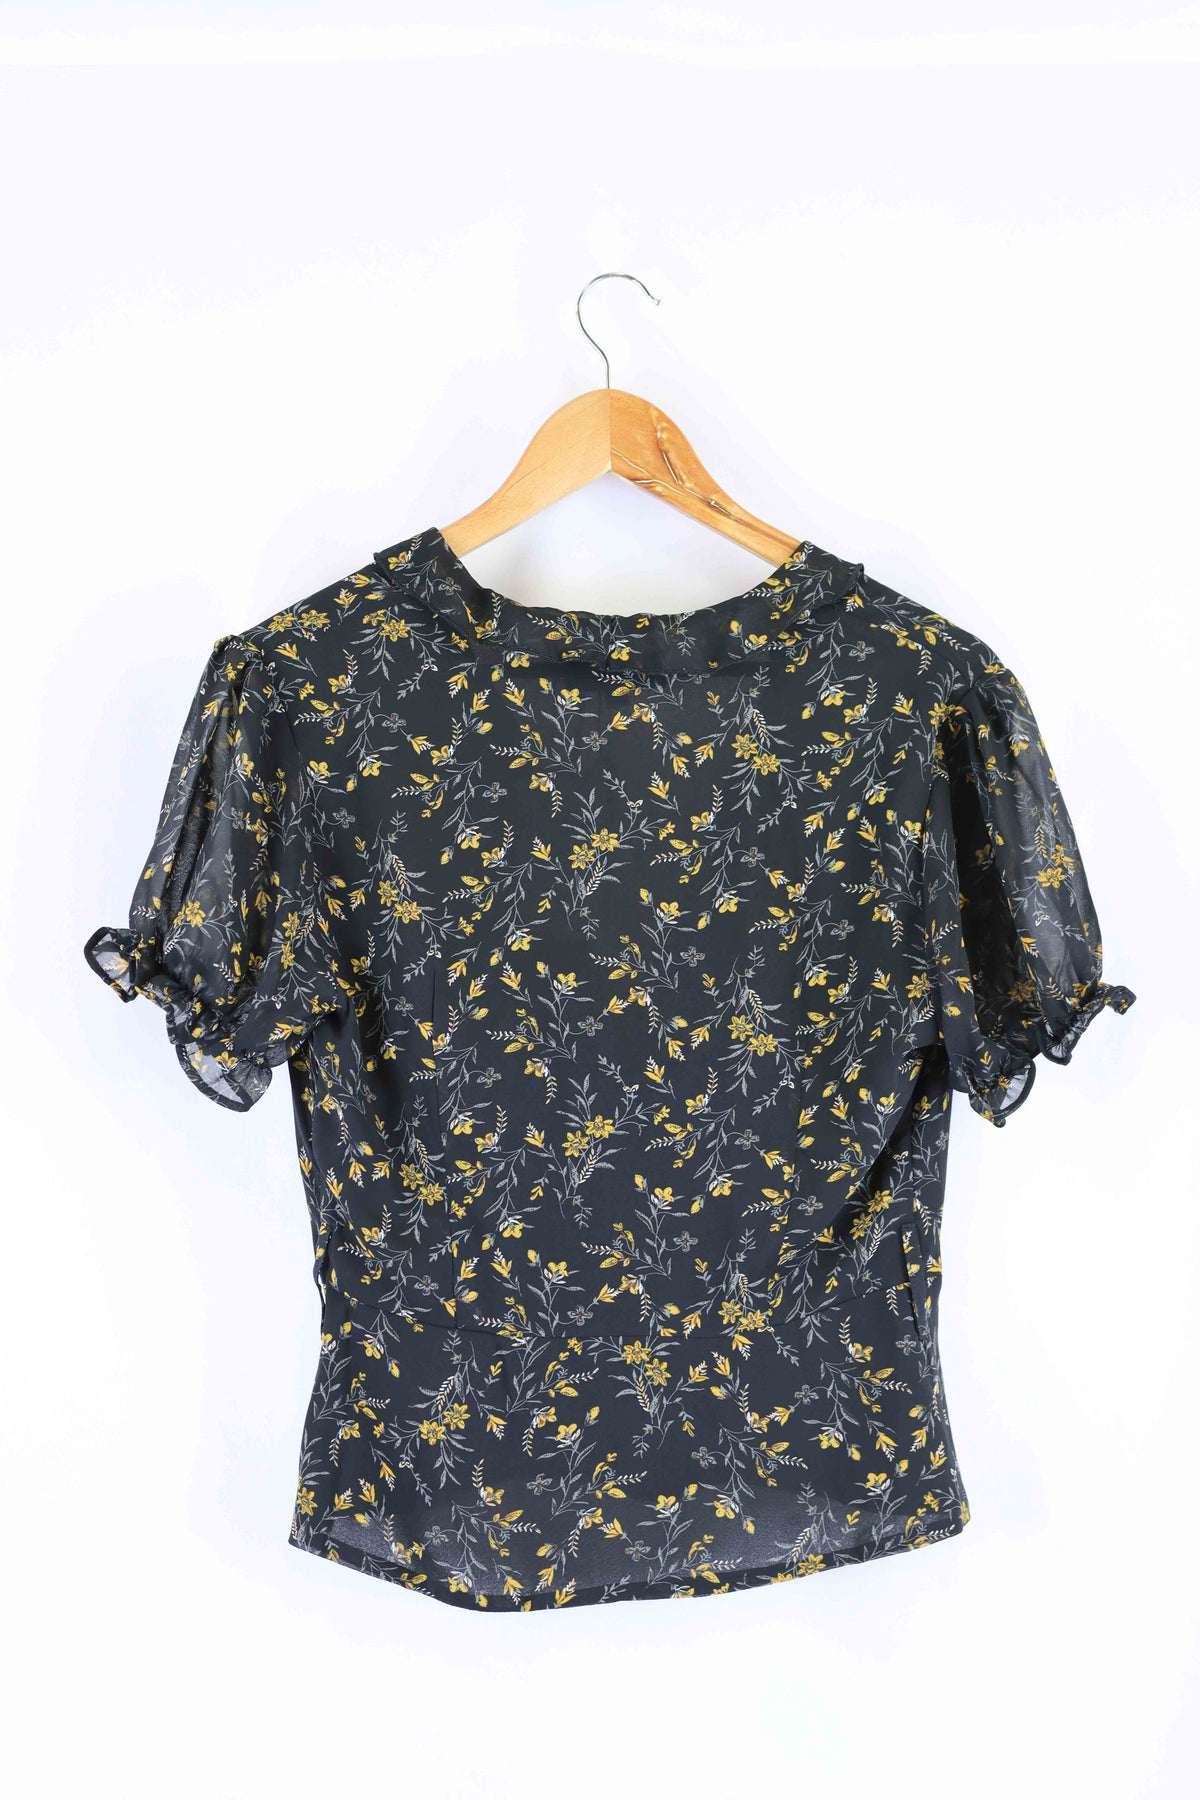 Rihoas Black and Yellow Floral Top M